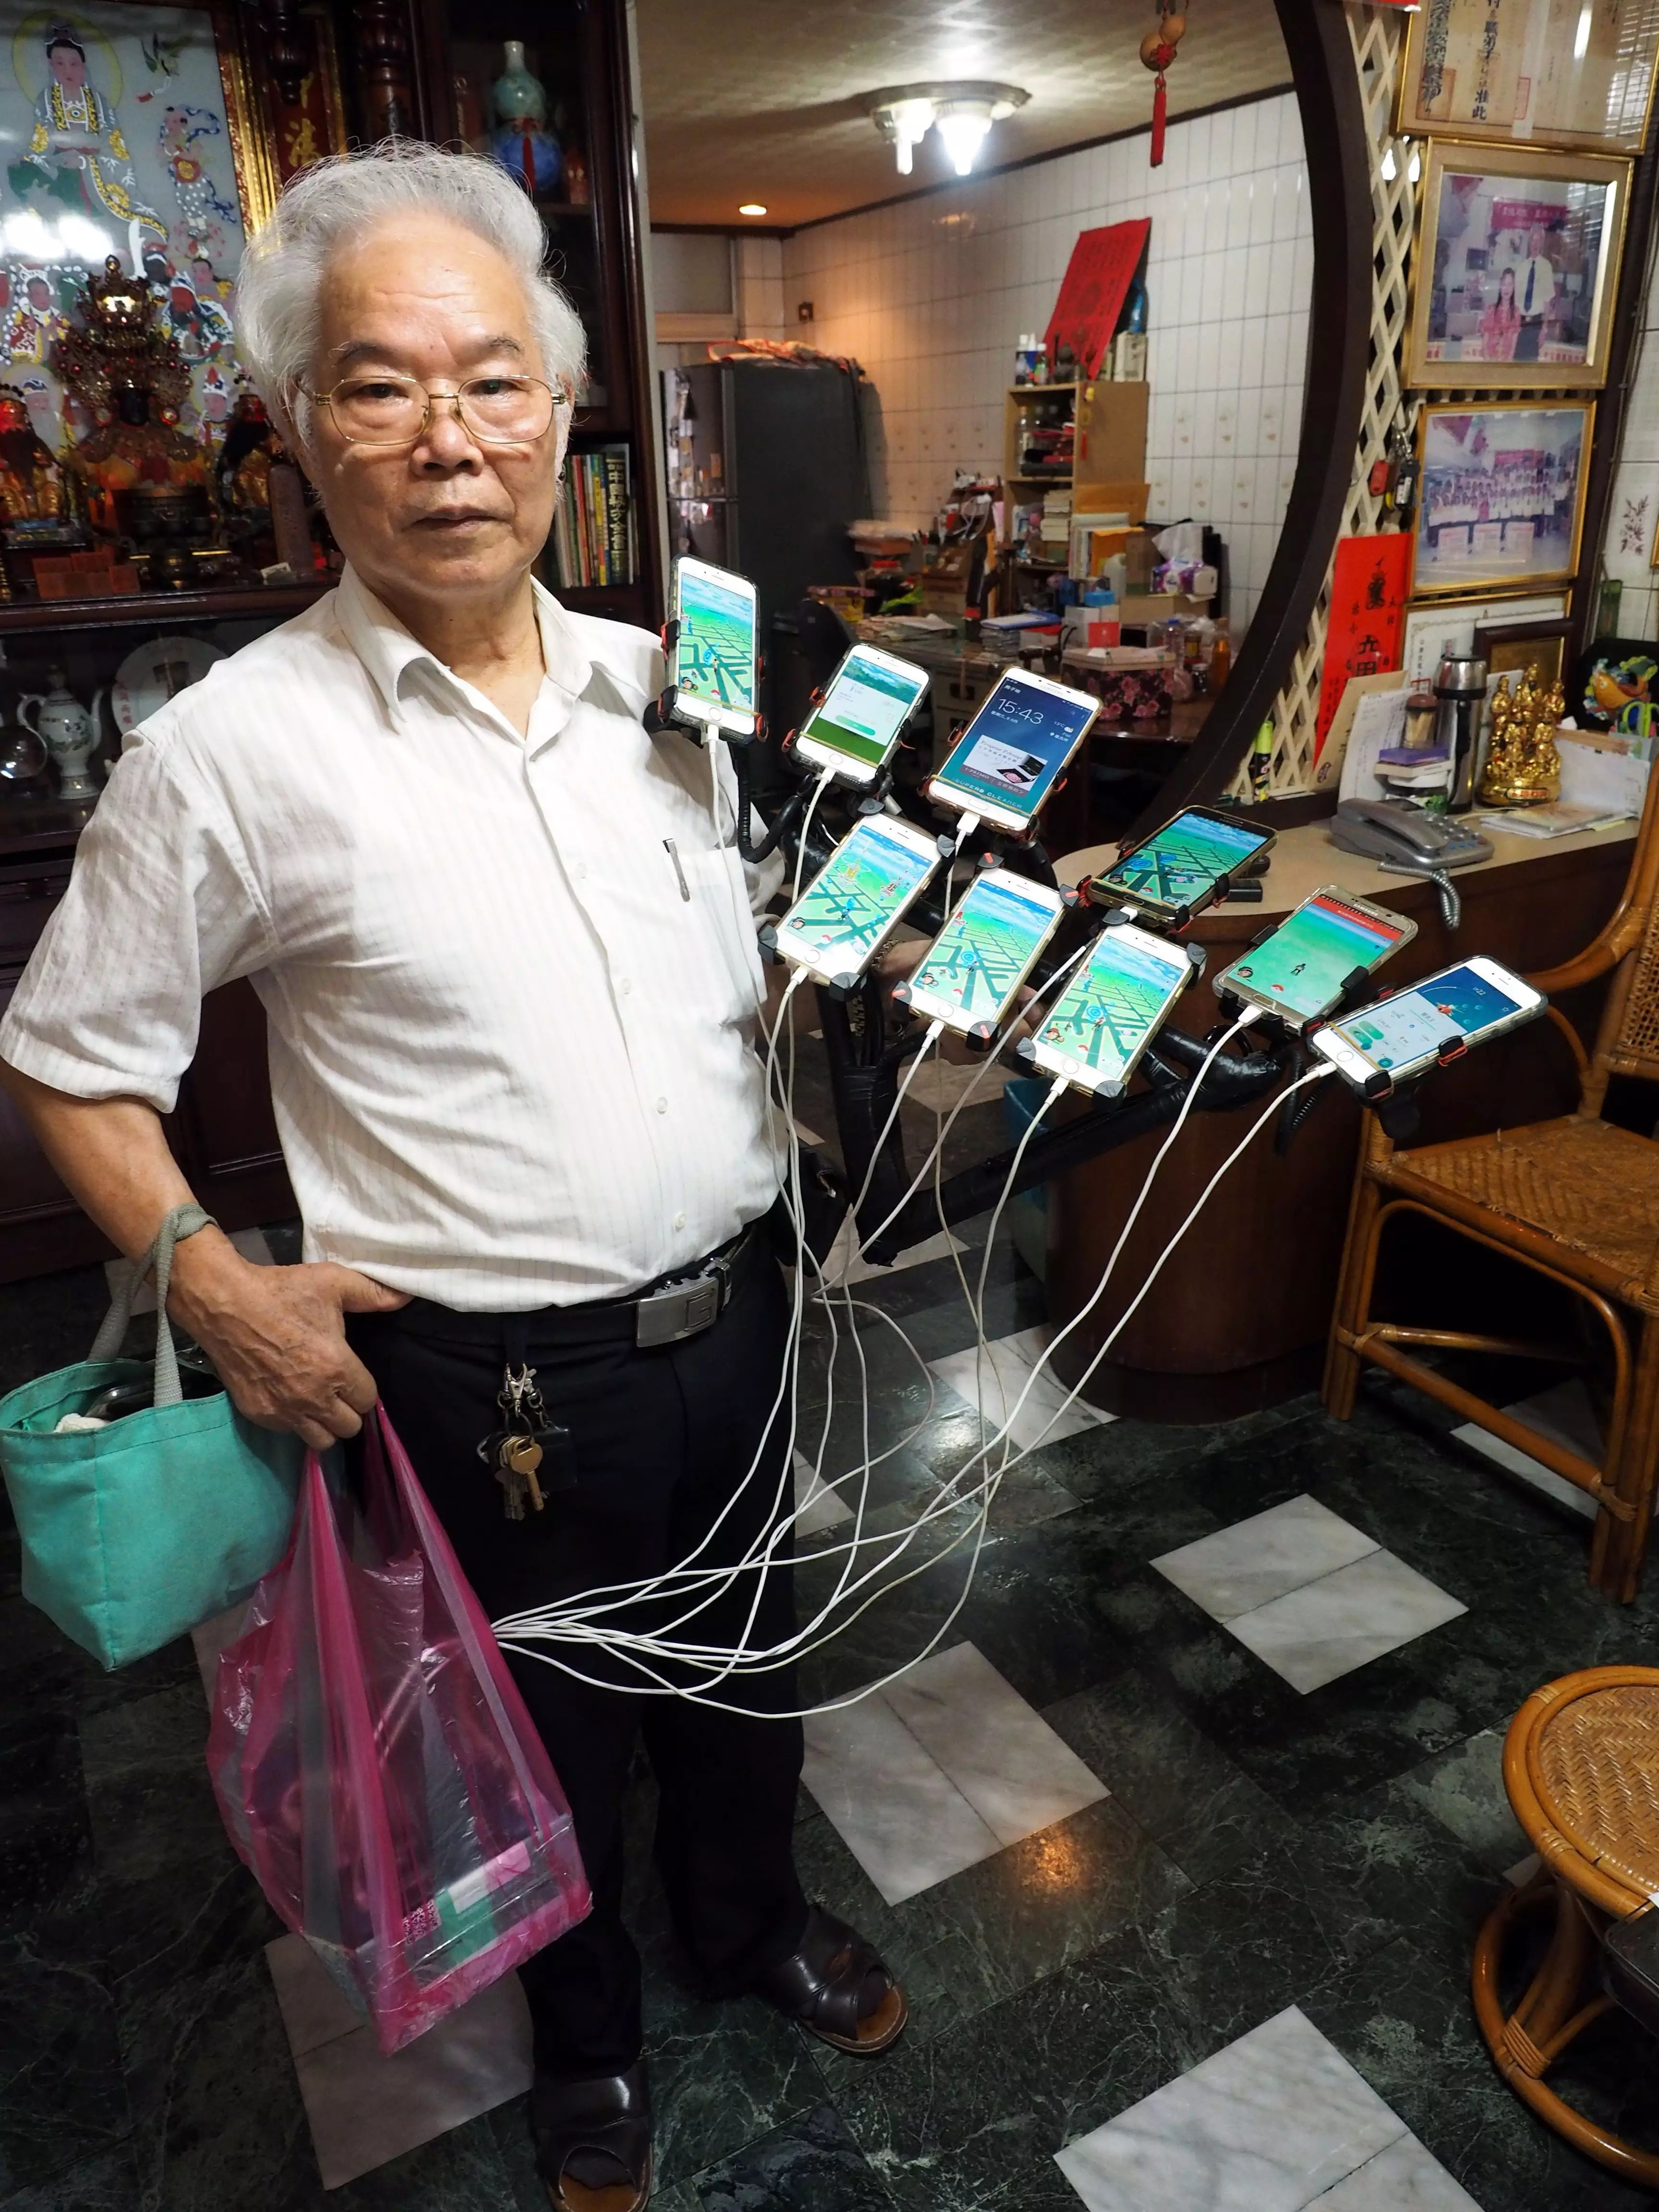 It's hard to miss Chen and his many mobiles (he has double as many now).